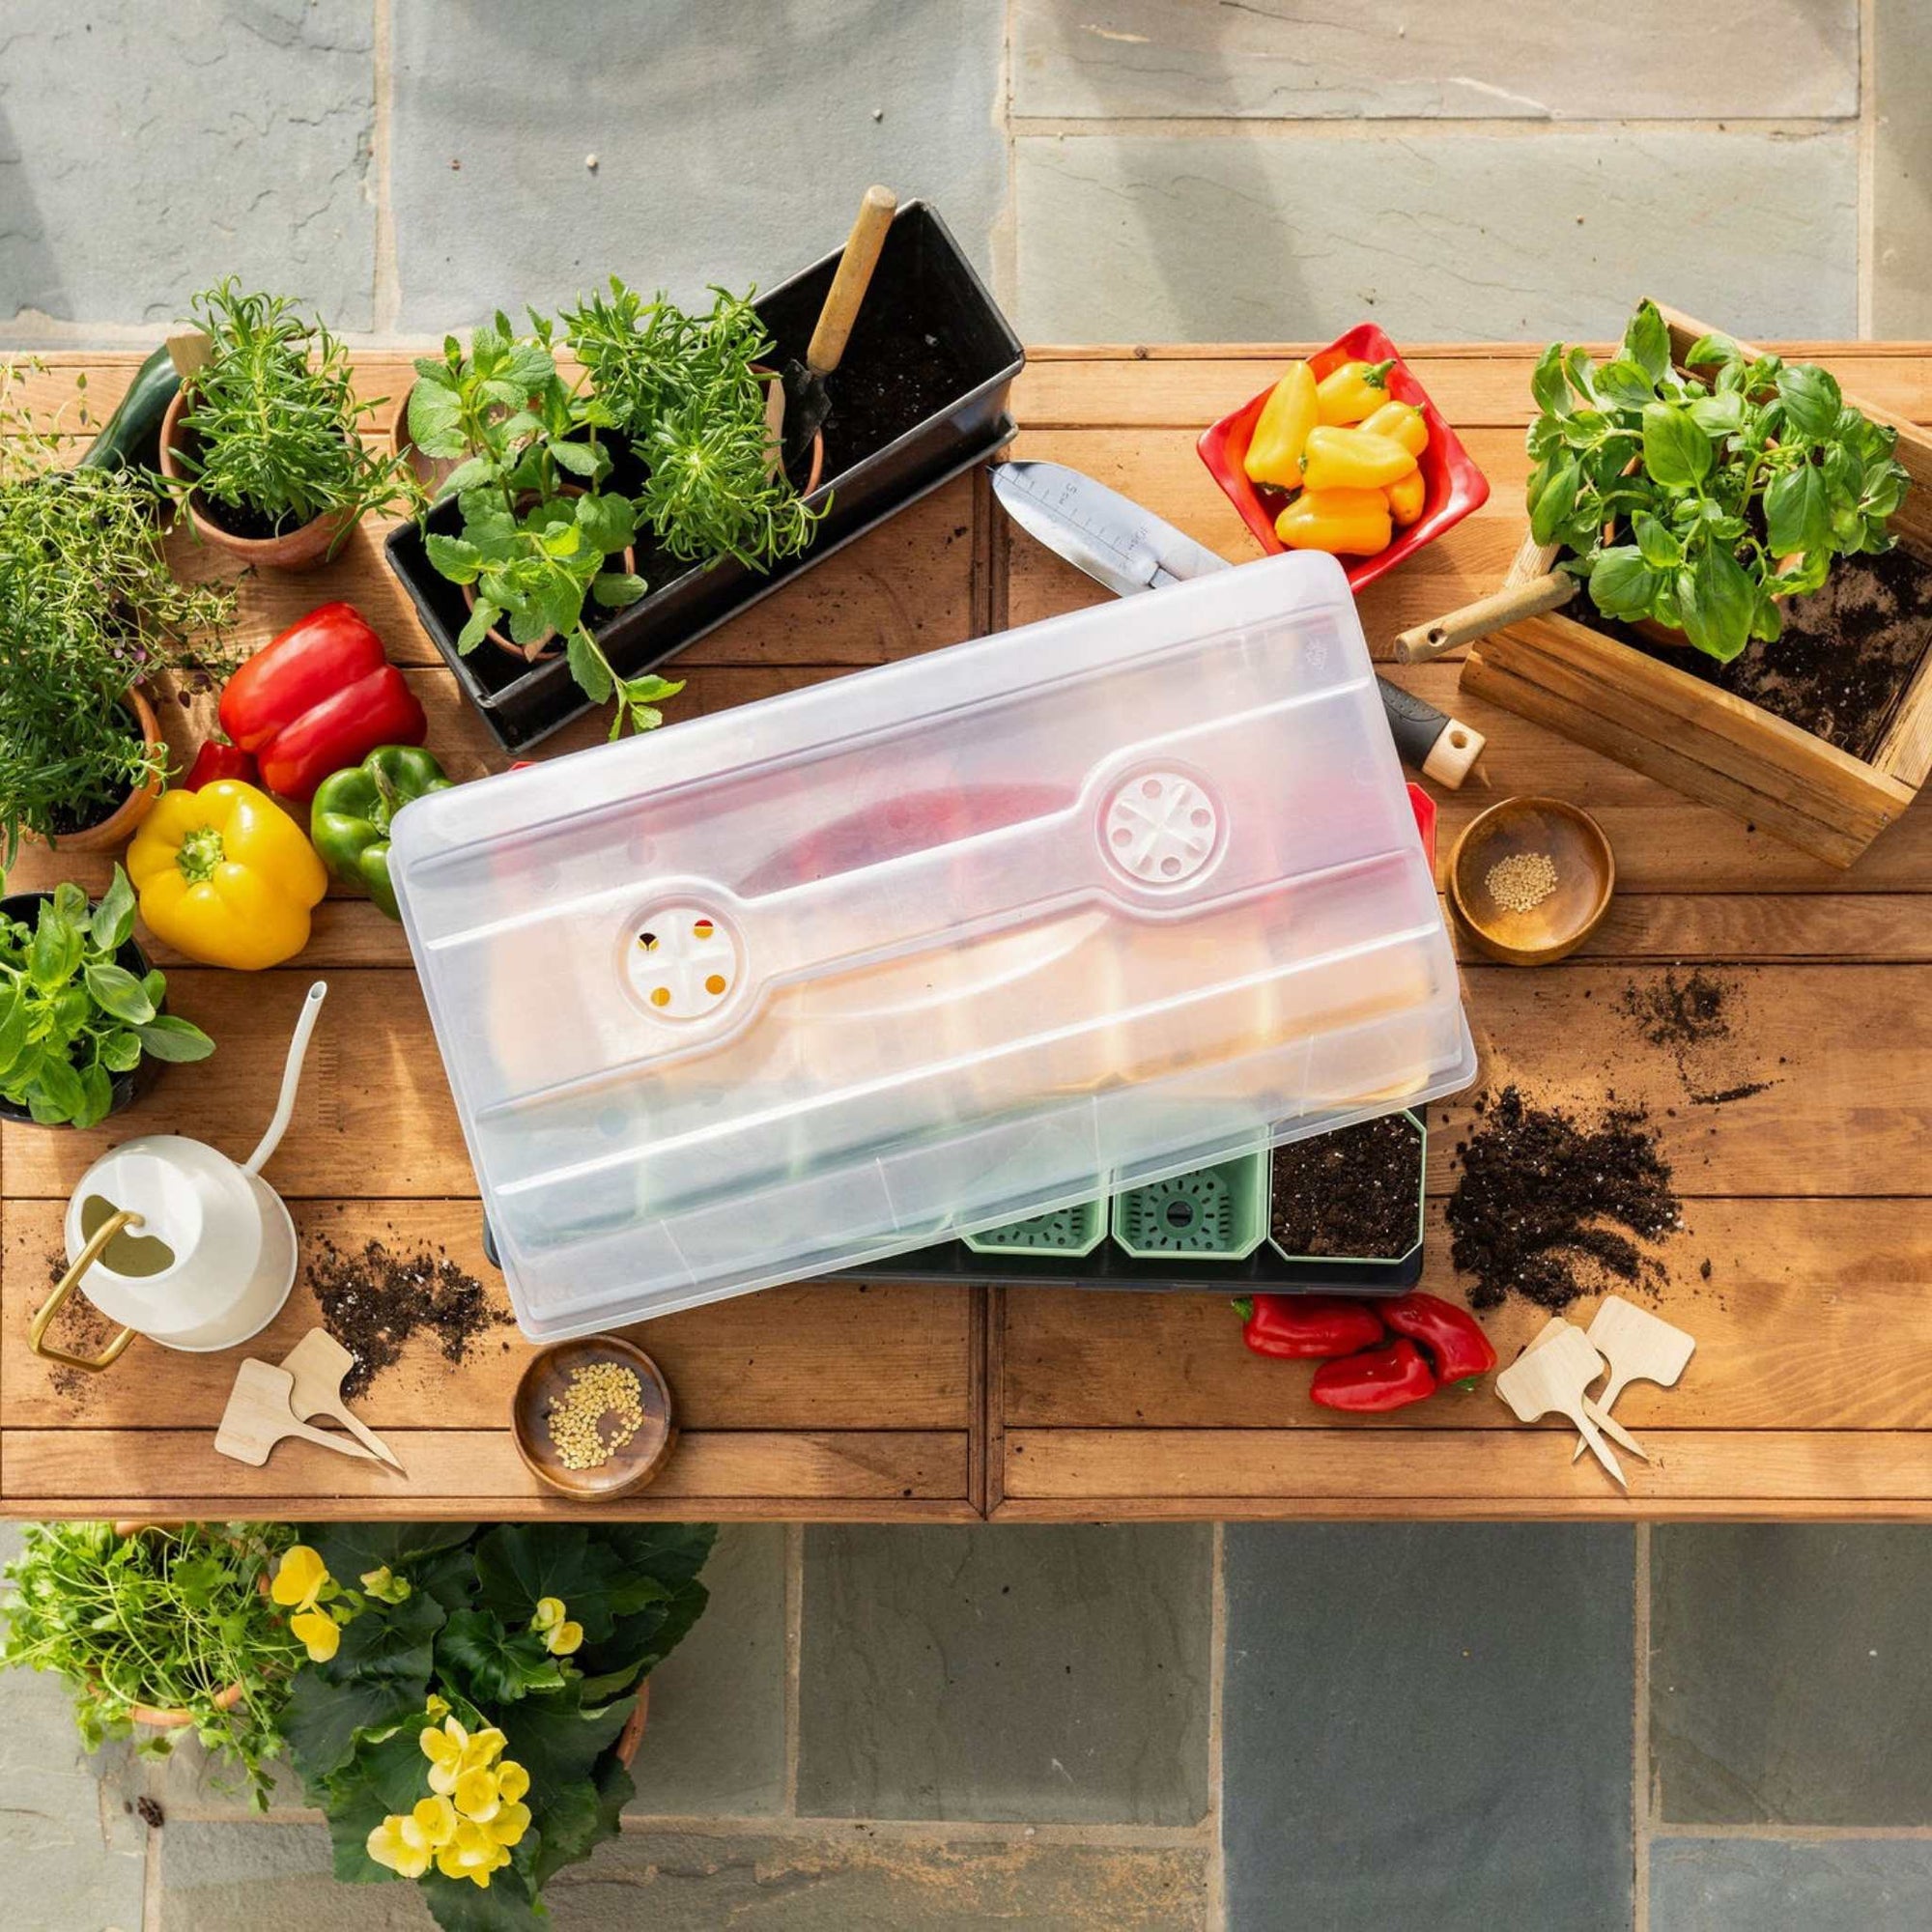 Overhead view of a wooden planting table with 1020 humidity dome covering red, green, and yellow 3 inch pots in a dark grey 1020 tray. Also on the table are young plants, peppers, watering can, and pepper seeds.